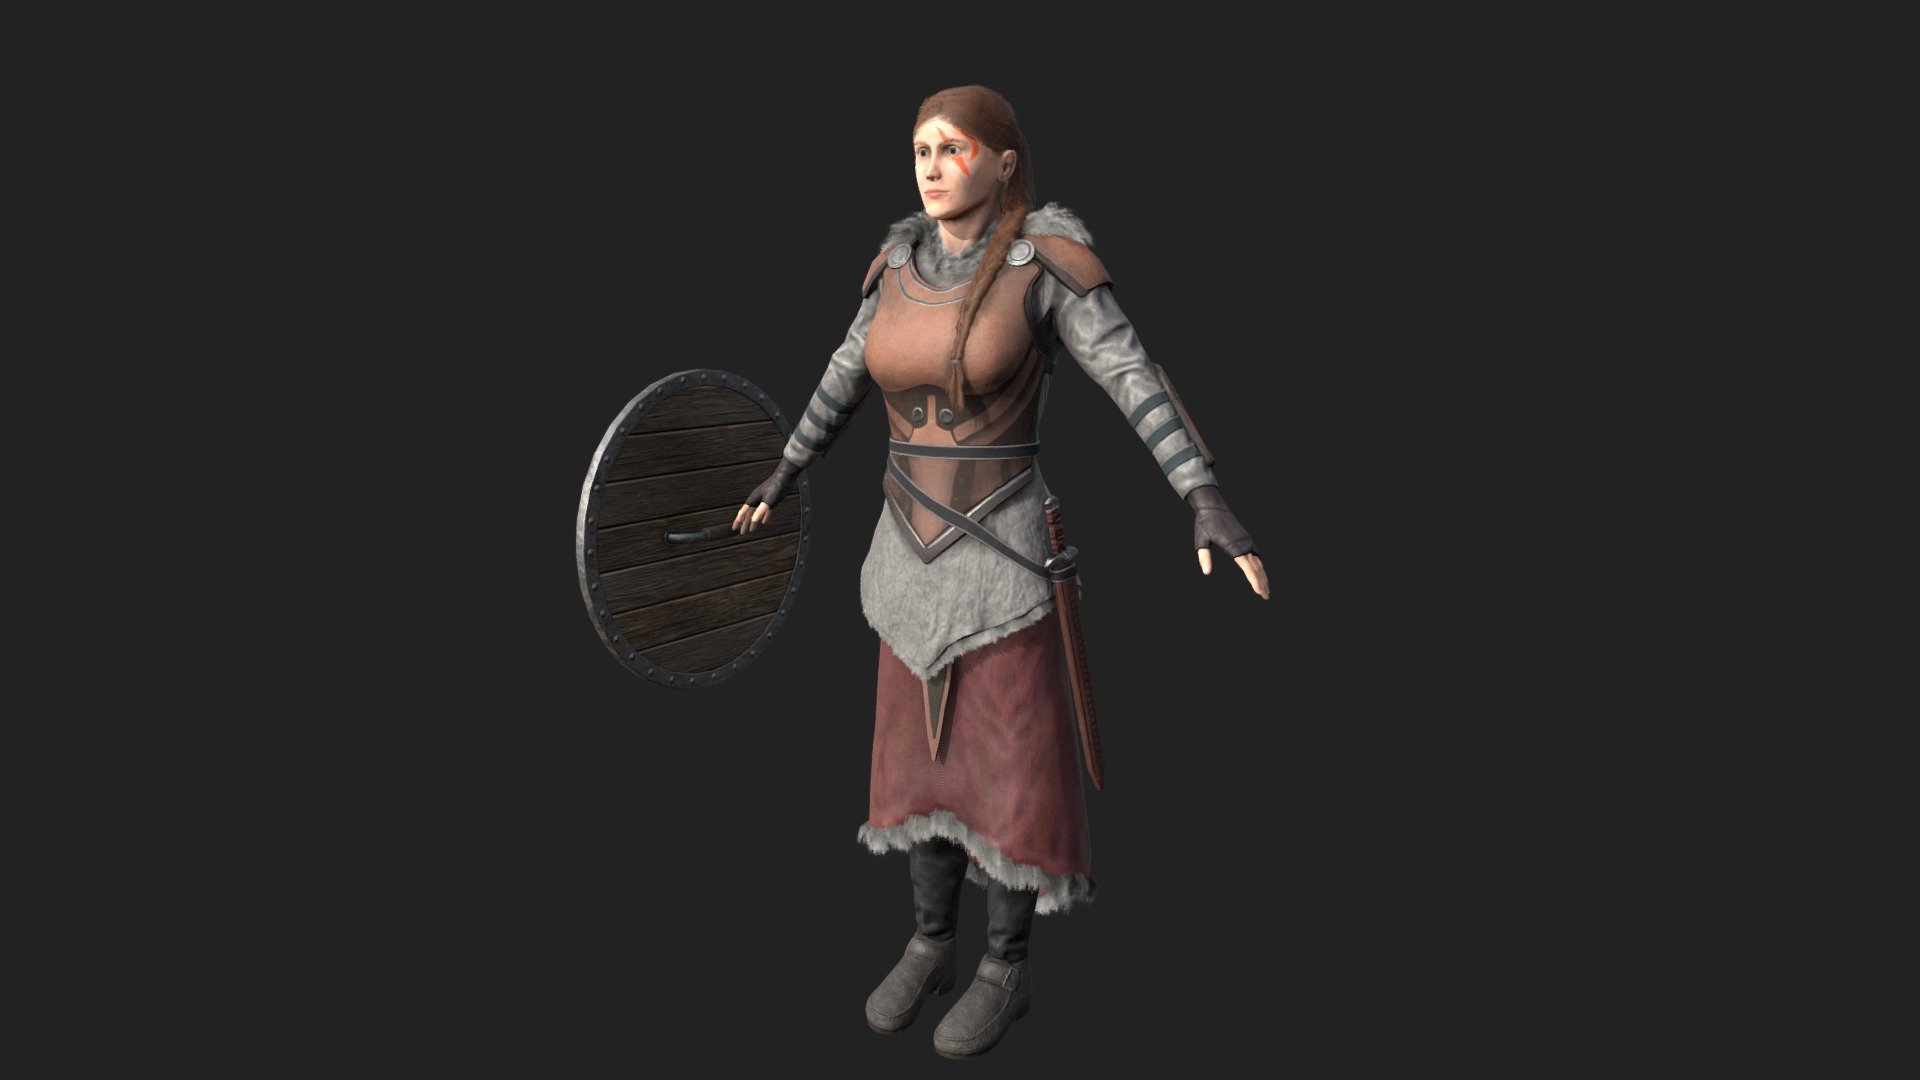 A textured female viking Charactor modelled and textured by Finn Swift. The design is based from this concept image:
https://i.pinimg.com/originals/21/8e/0b/218e0b316f198a7a363c346369cfdb63.png - GART220 Female Viking - Download Free 3D model by Finn_Swift 3d model